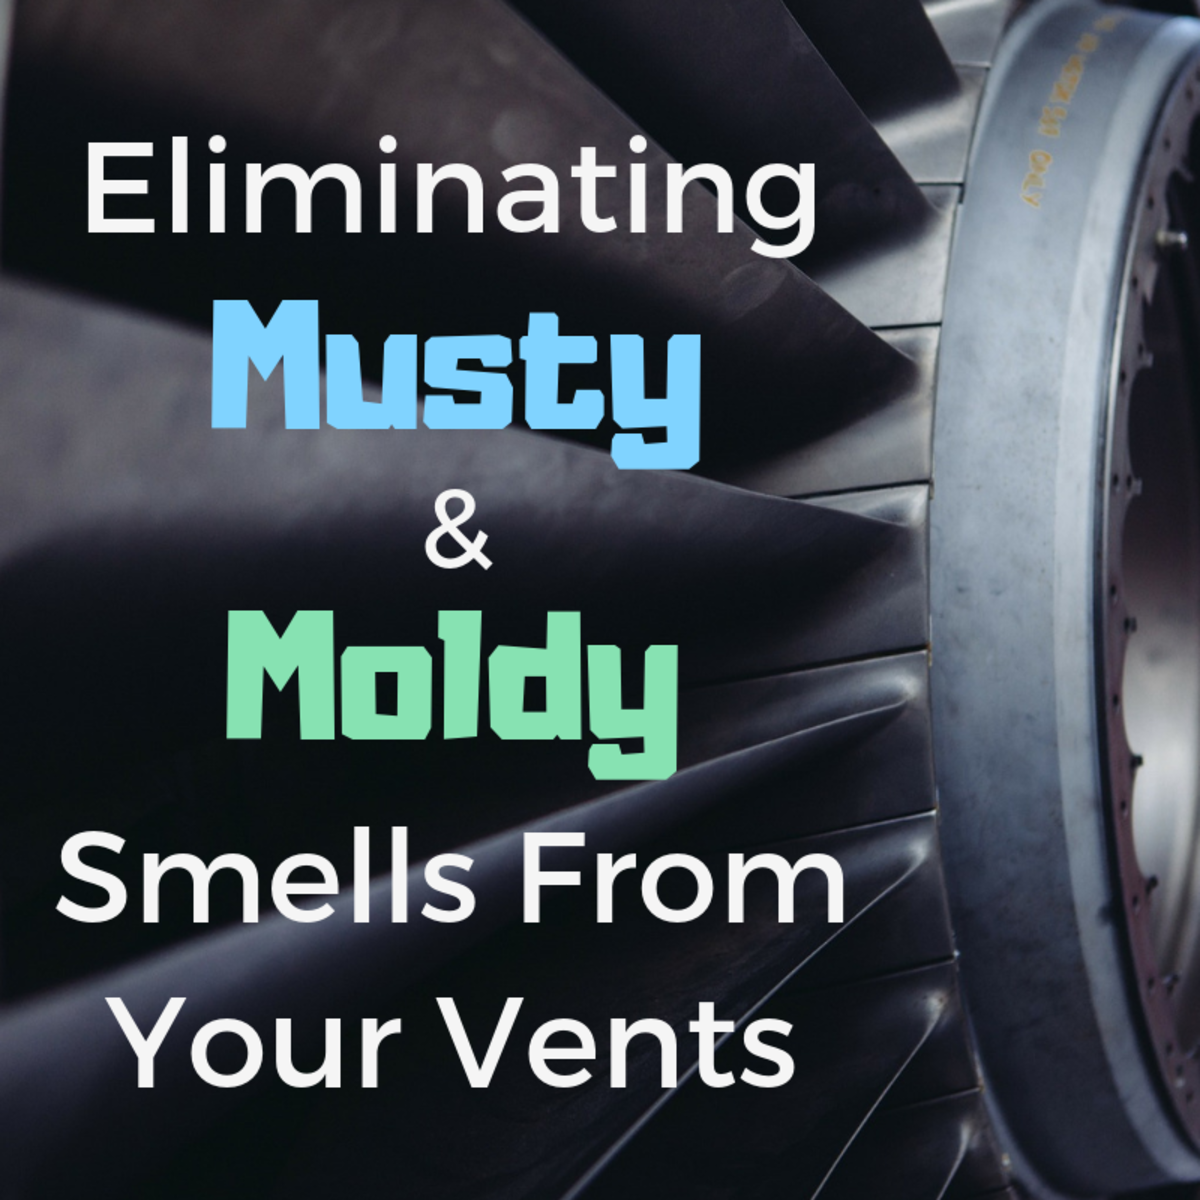 This article will provide some troubleshooting tips for finding out the source of musty and moldy odors coming from your air ducts and what you can do about it.